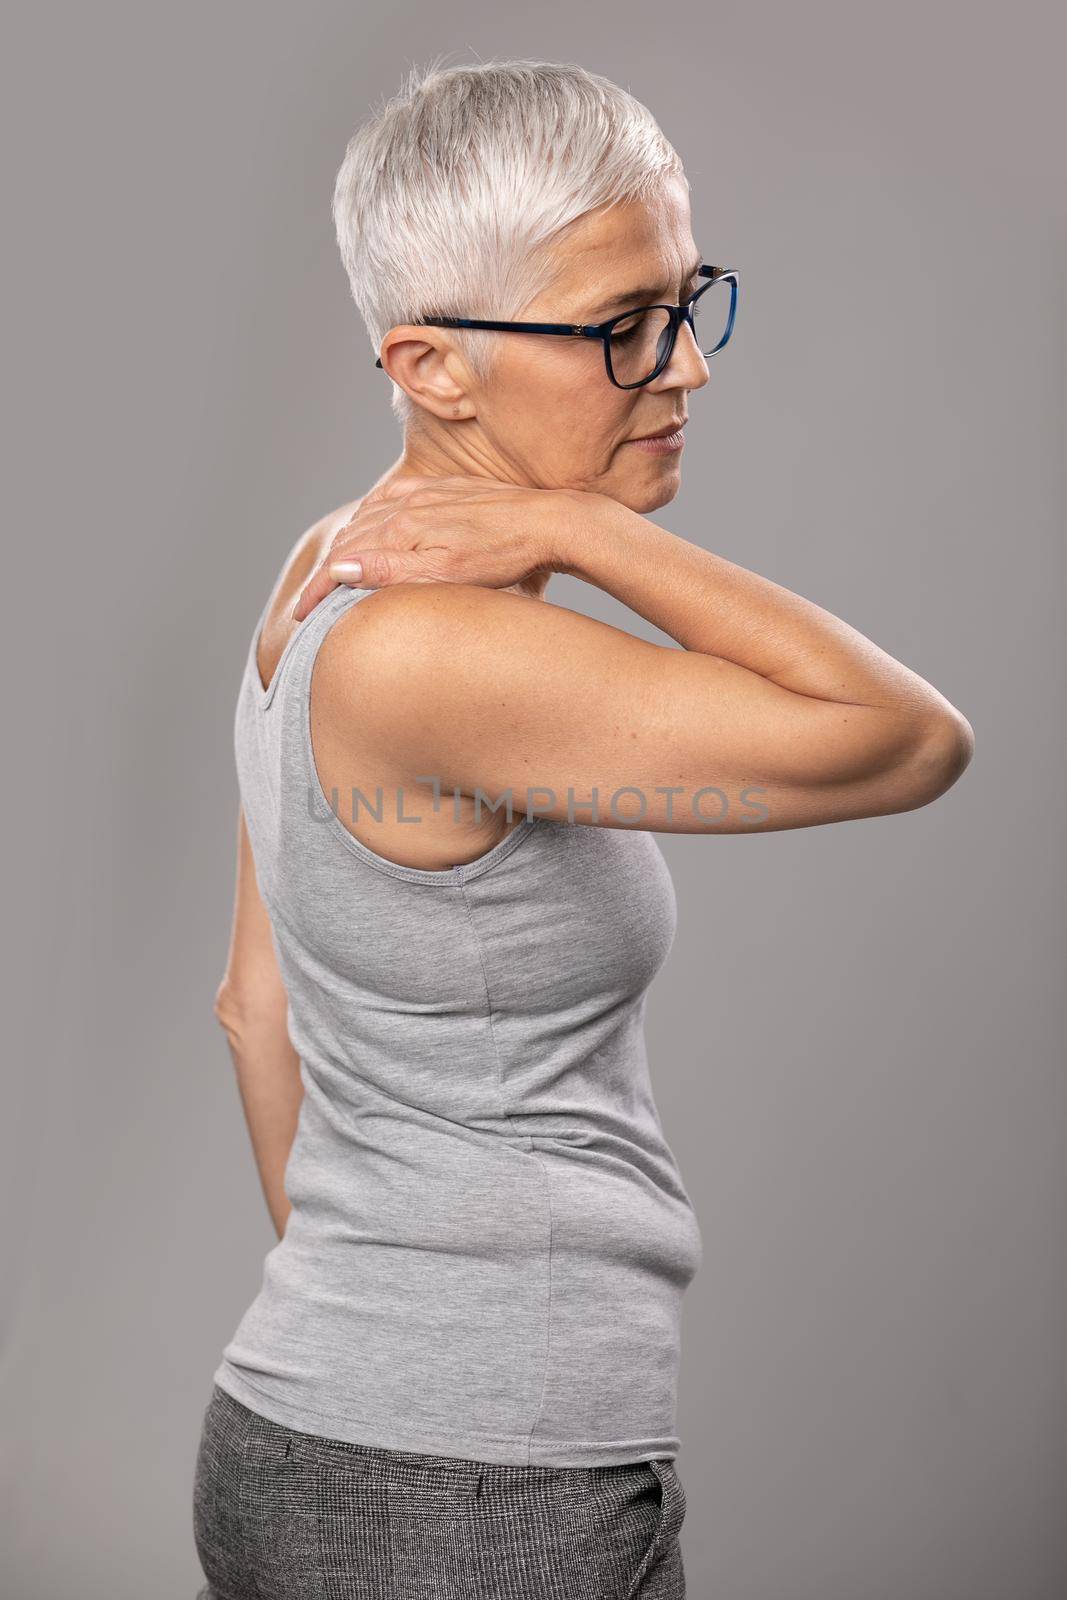 Backache pain in back, senior old woman with short gray hair and glasses show body and spinal muscle problems by adamr